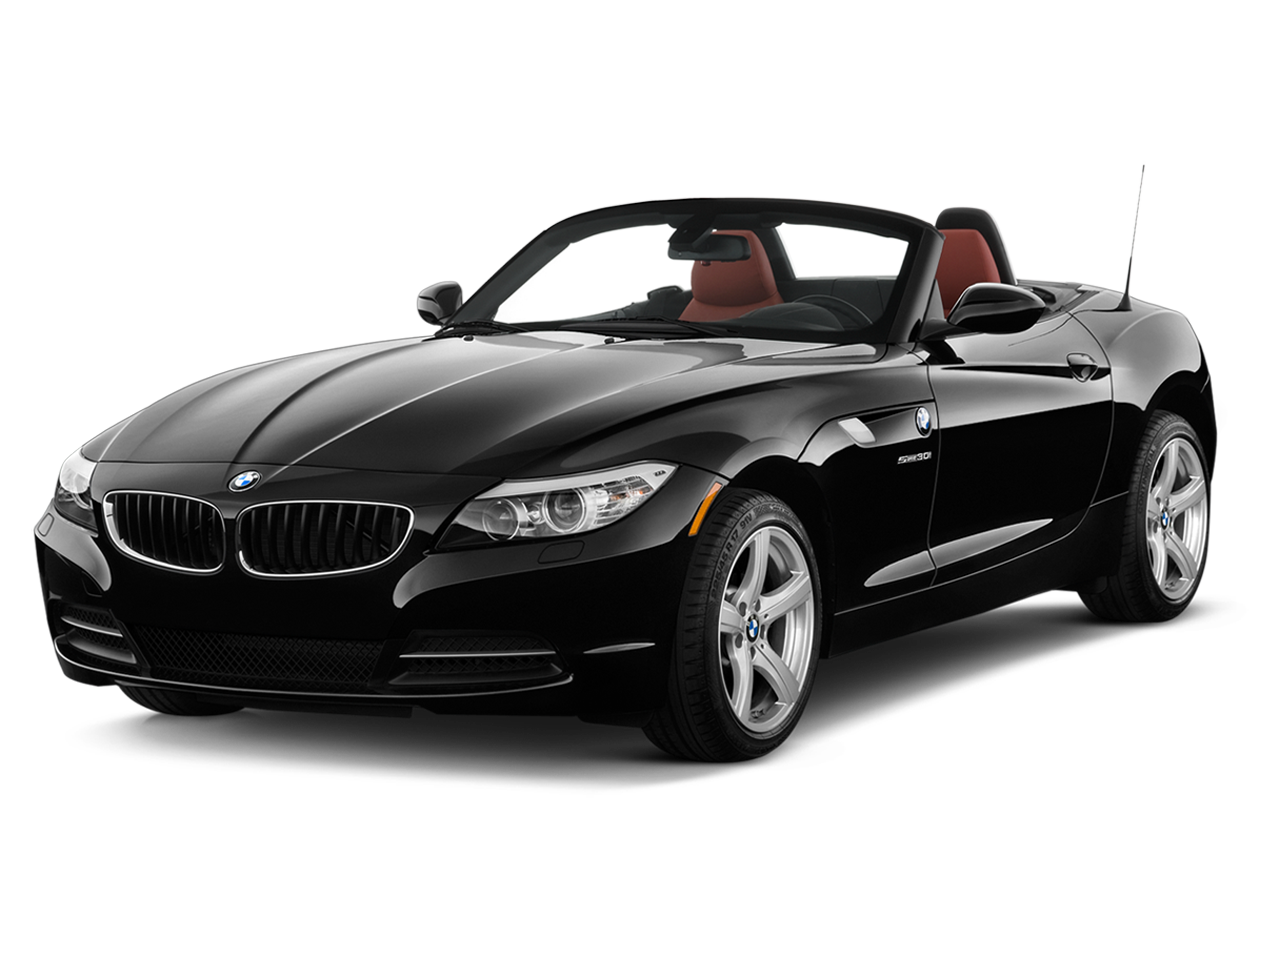 2012 BMW Z4 Prices, Reviews, and Photos - MotorTrend